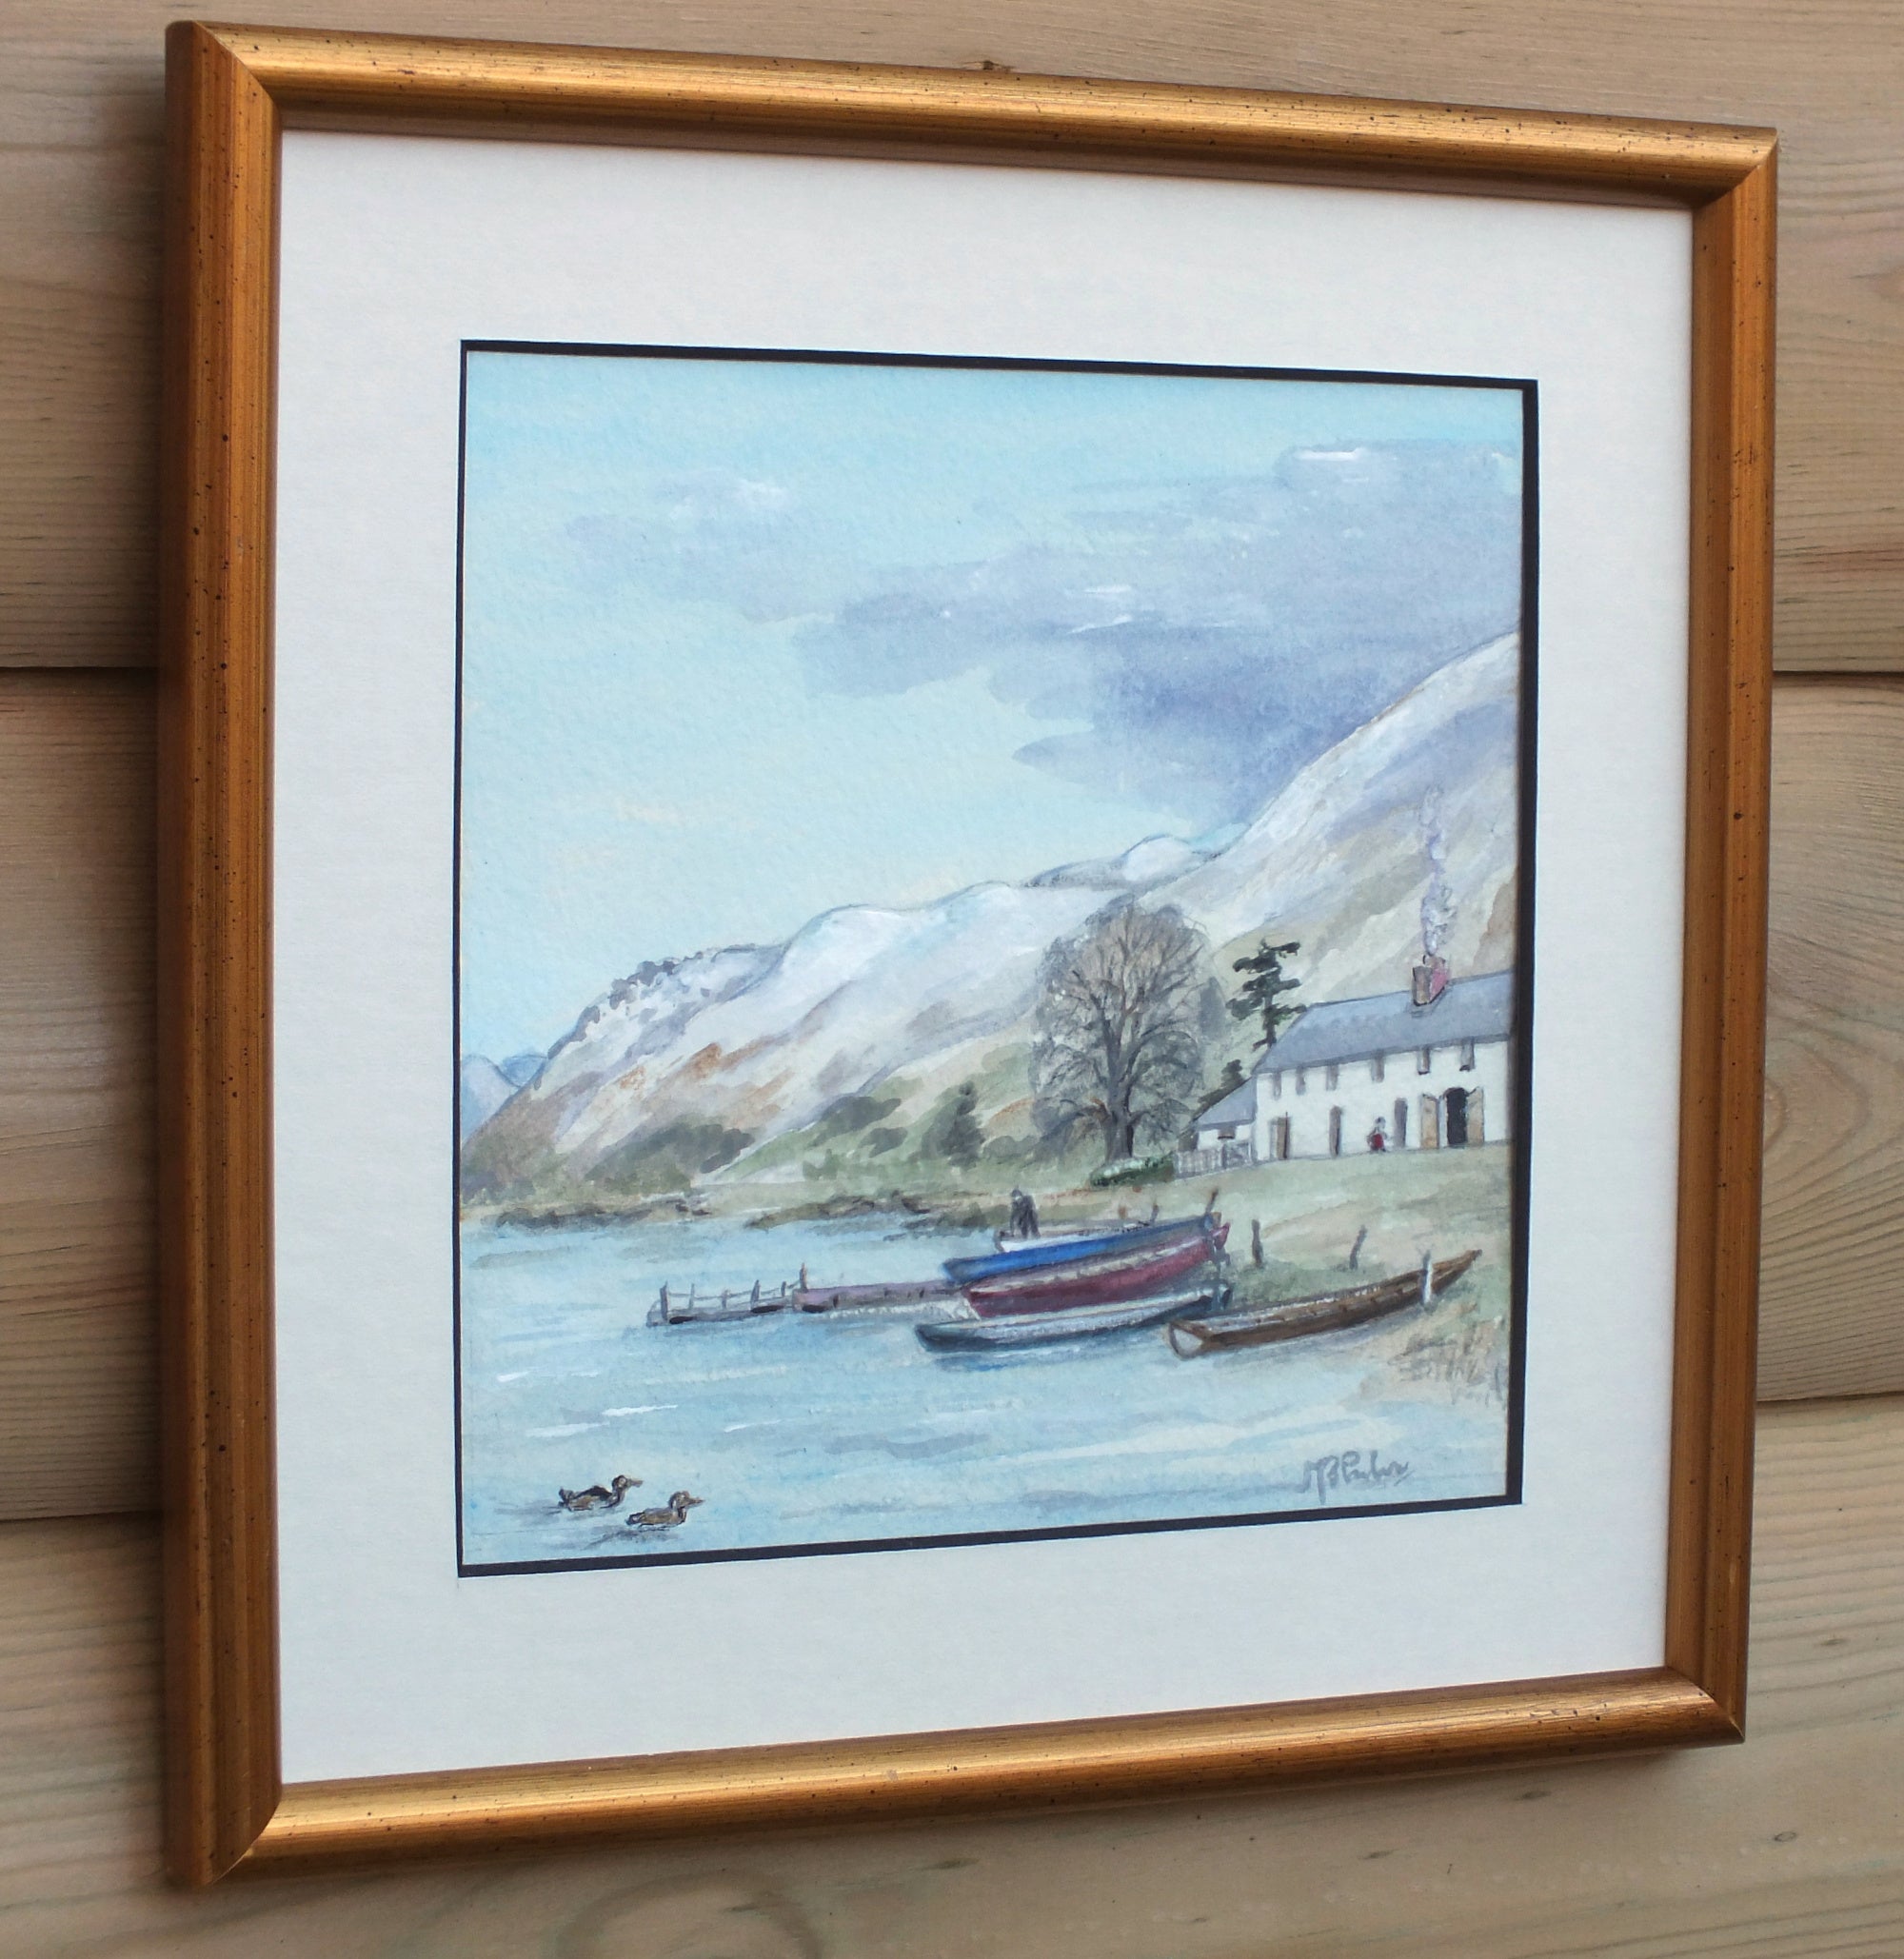 Scottish Loch Watercolour Painting Framed Signed